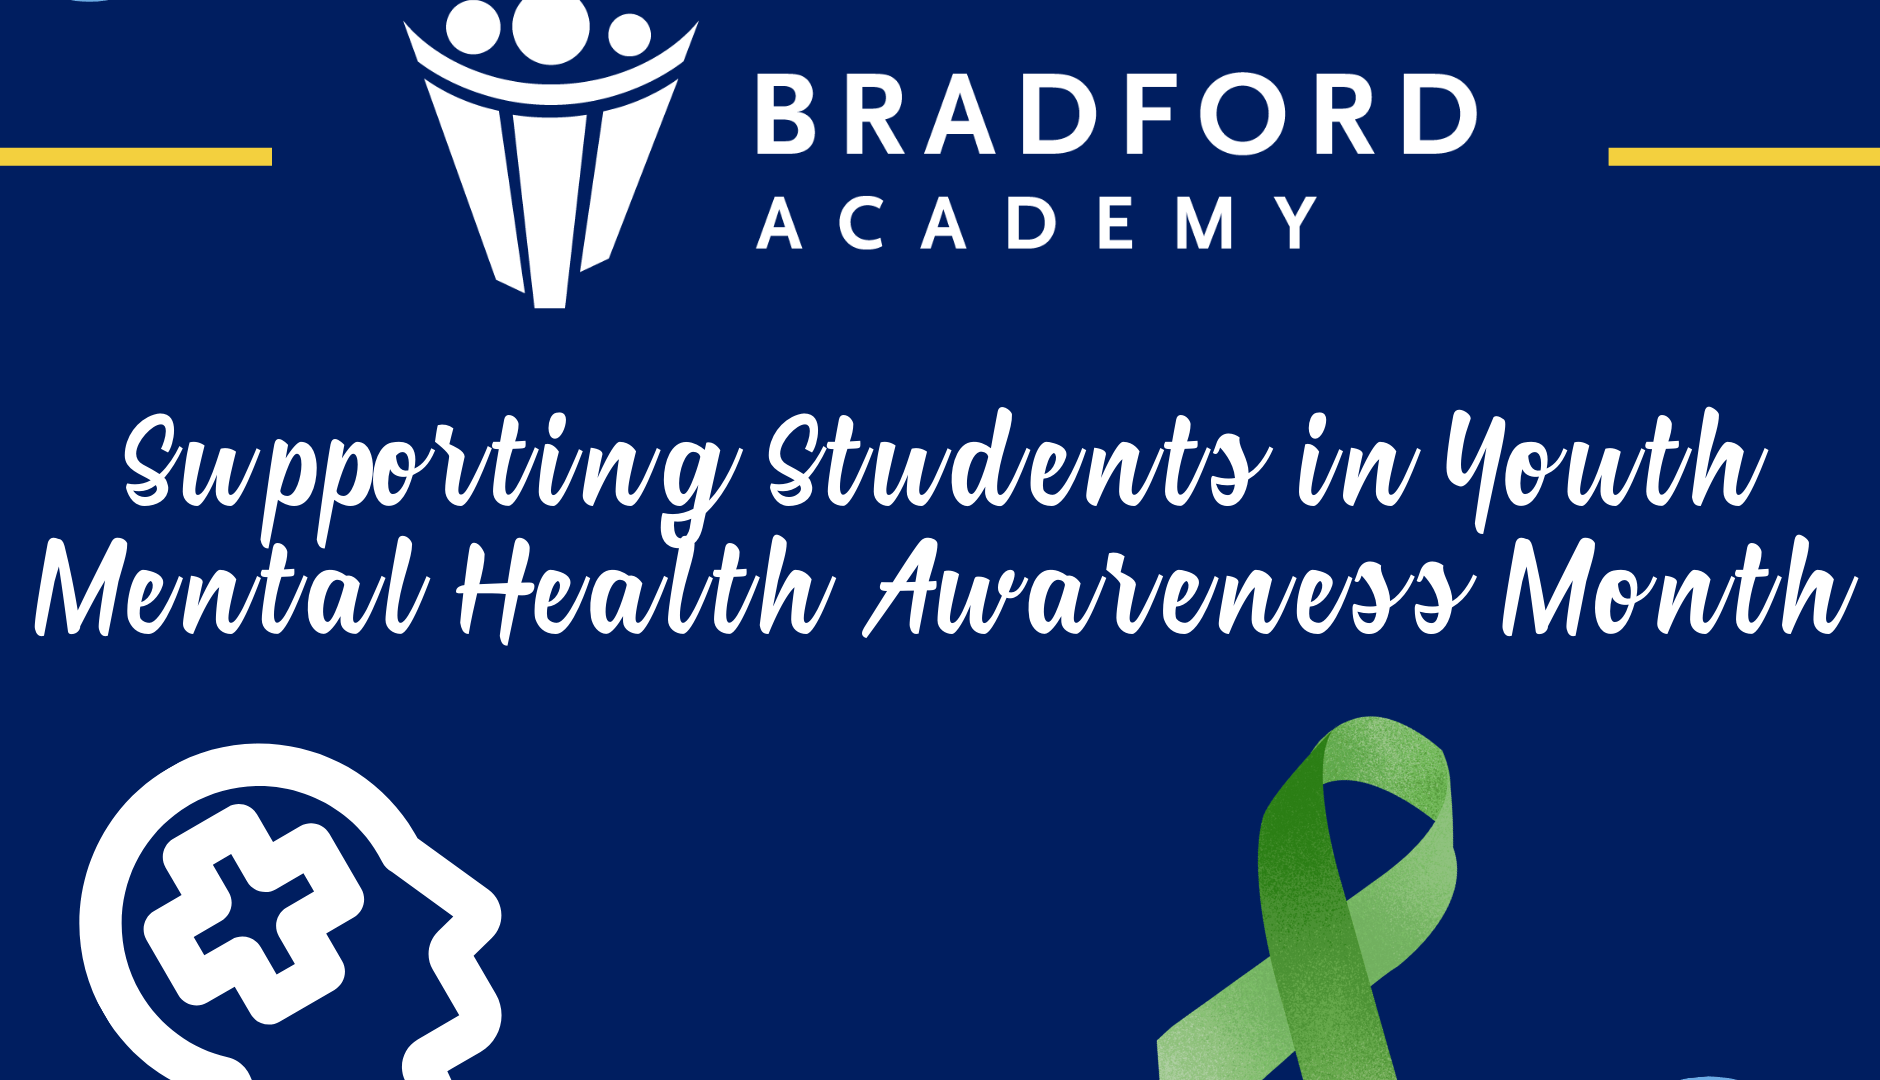 Bradford Academy Web-Safe Graphic for Supporting Students in Youth Mental Health Awareness Month Blog Post.